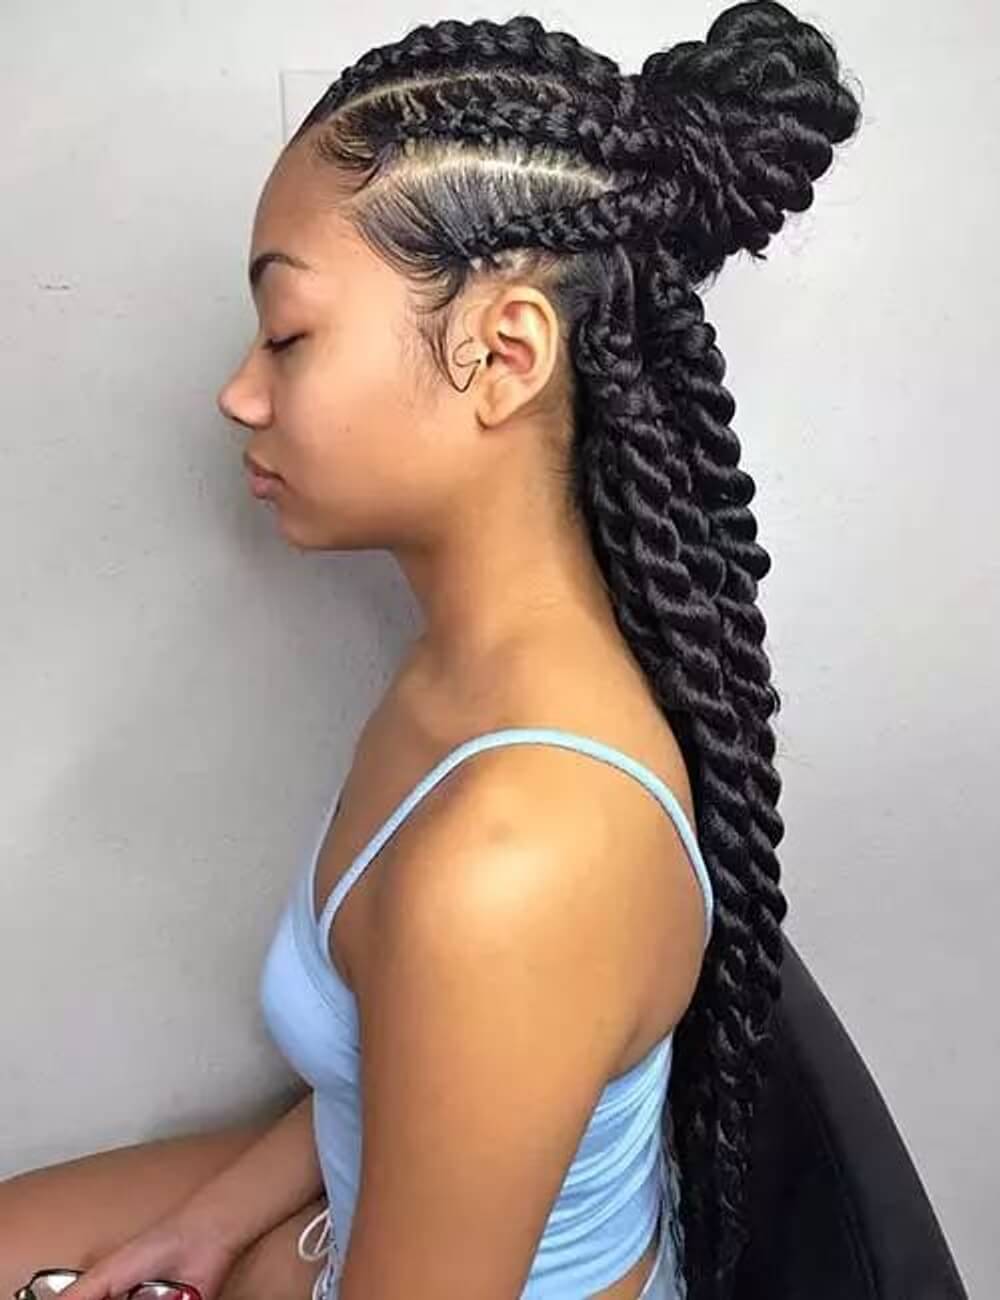 50 Trendy Braided Hairstyles To Instantly Glam Up Your Look - 351